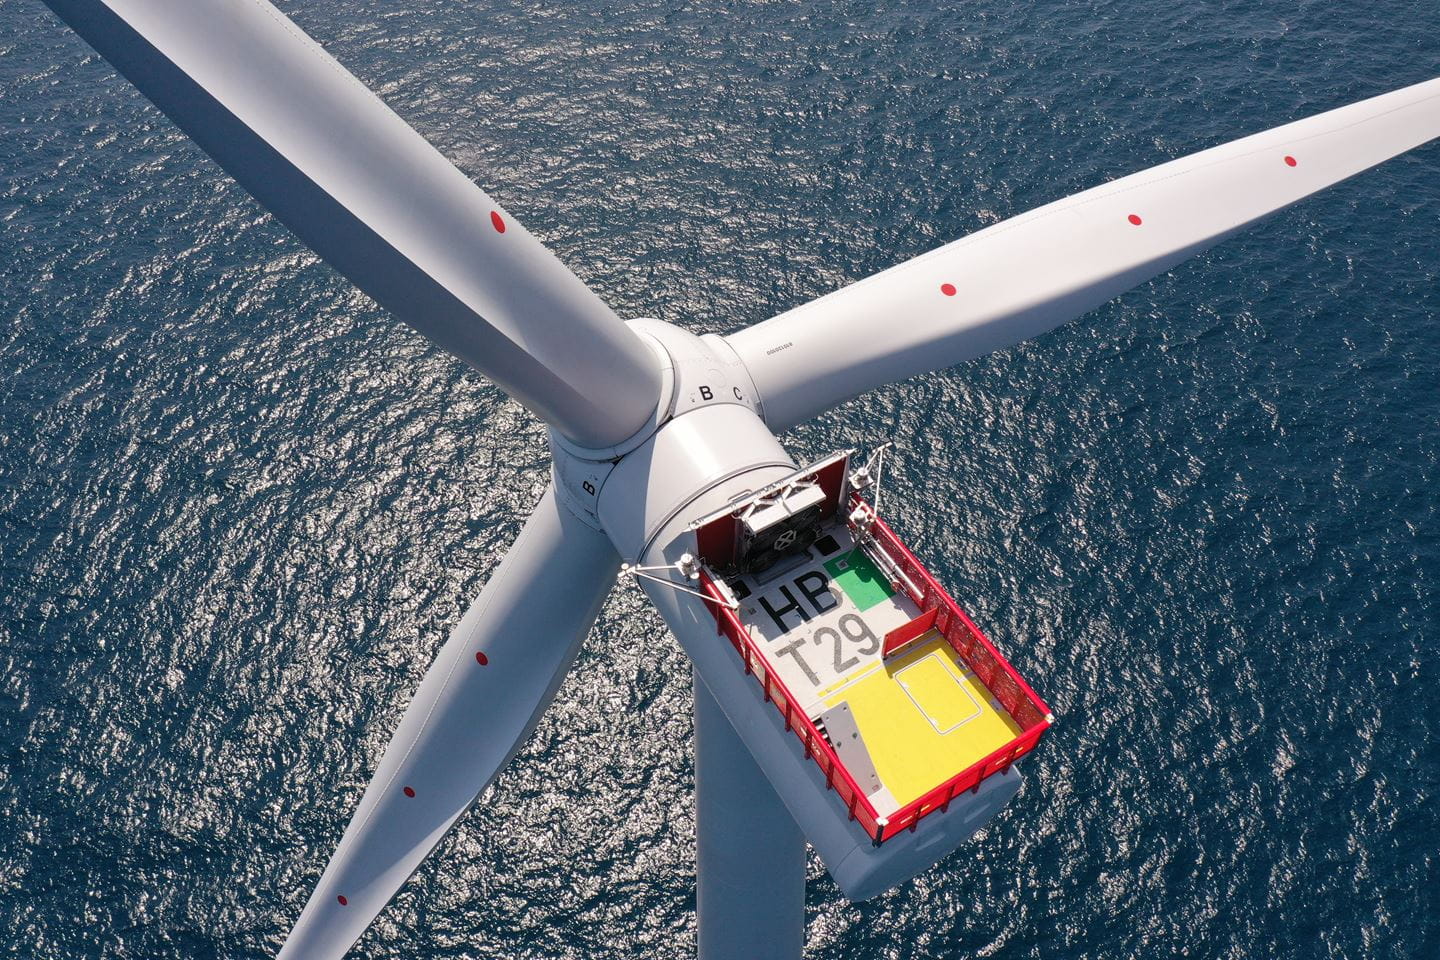 Image of a Hornsea 2 offshore wind turbine from the air